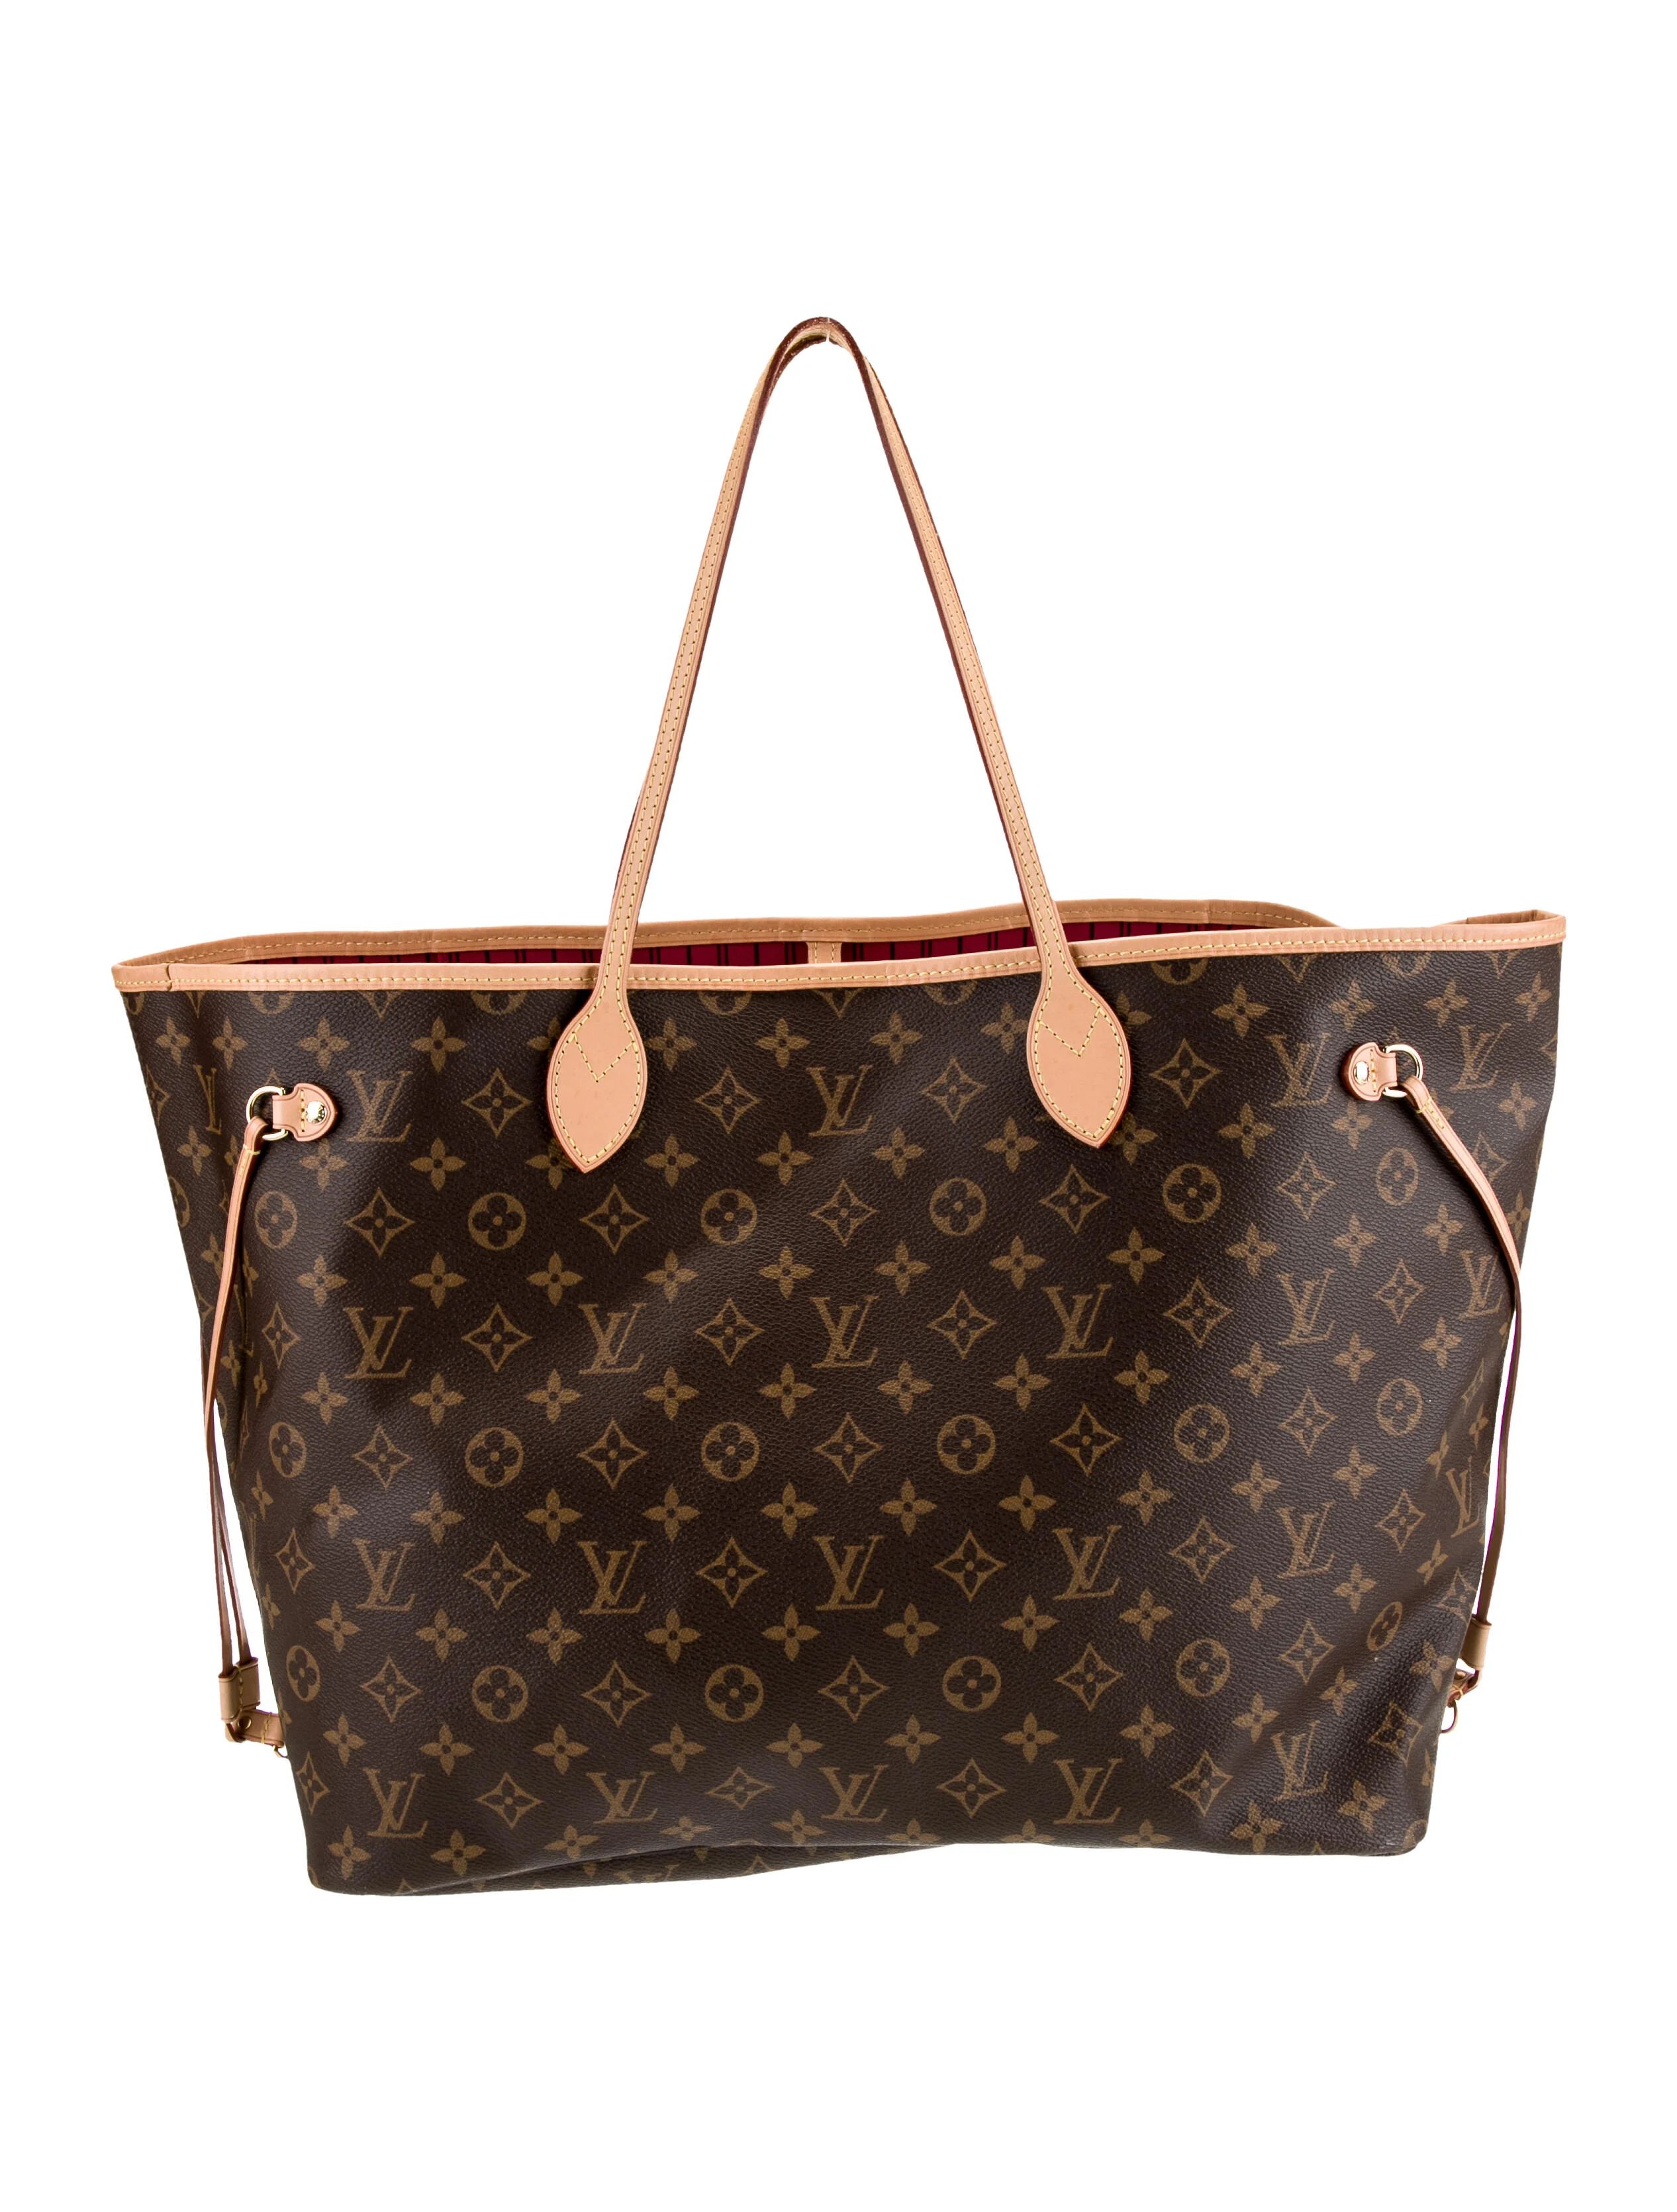 Monogram Neverfull Gm w/ Pouch | The RealReal